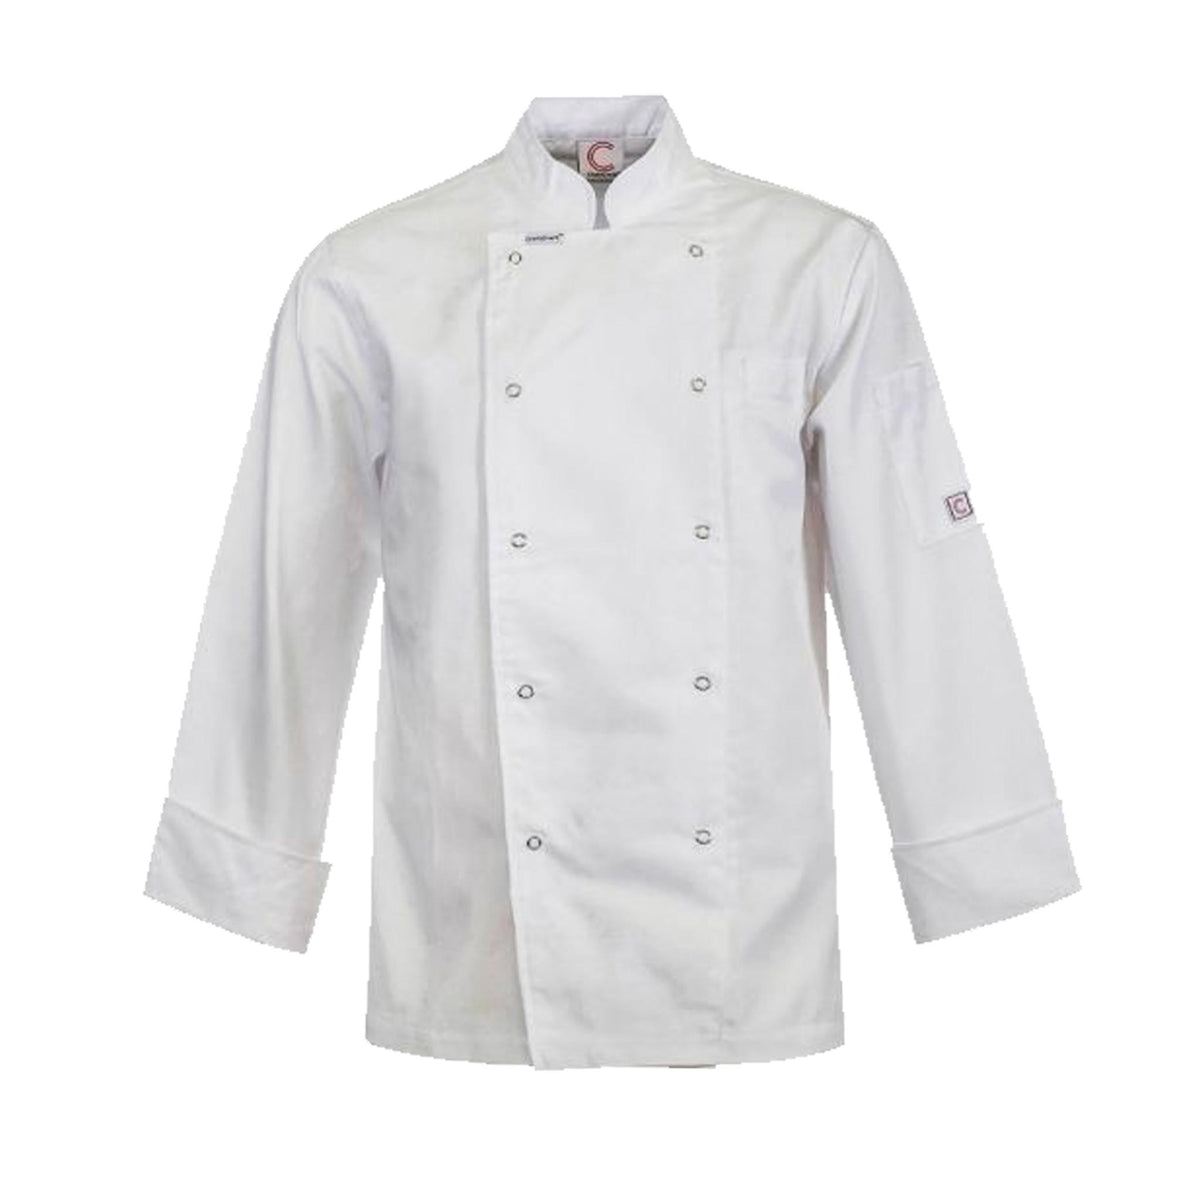 white long sleeve executive chefs jacket with press studs